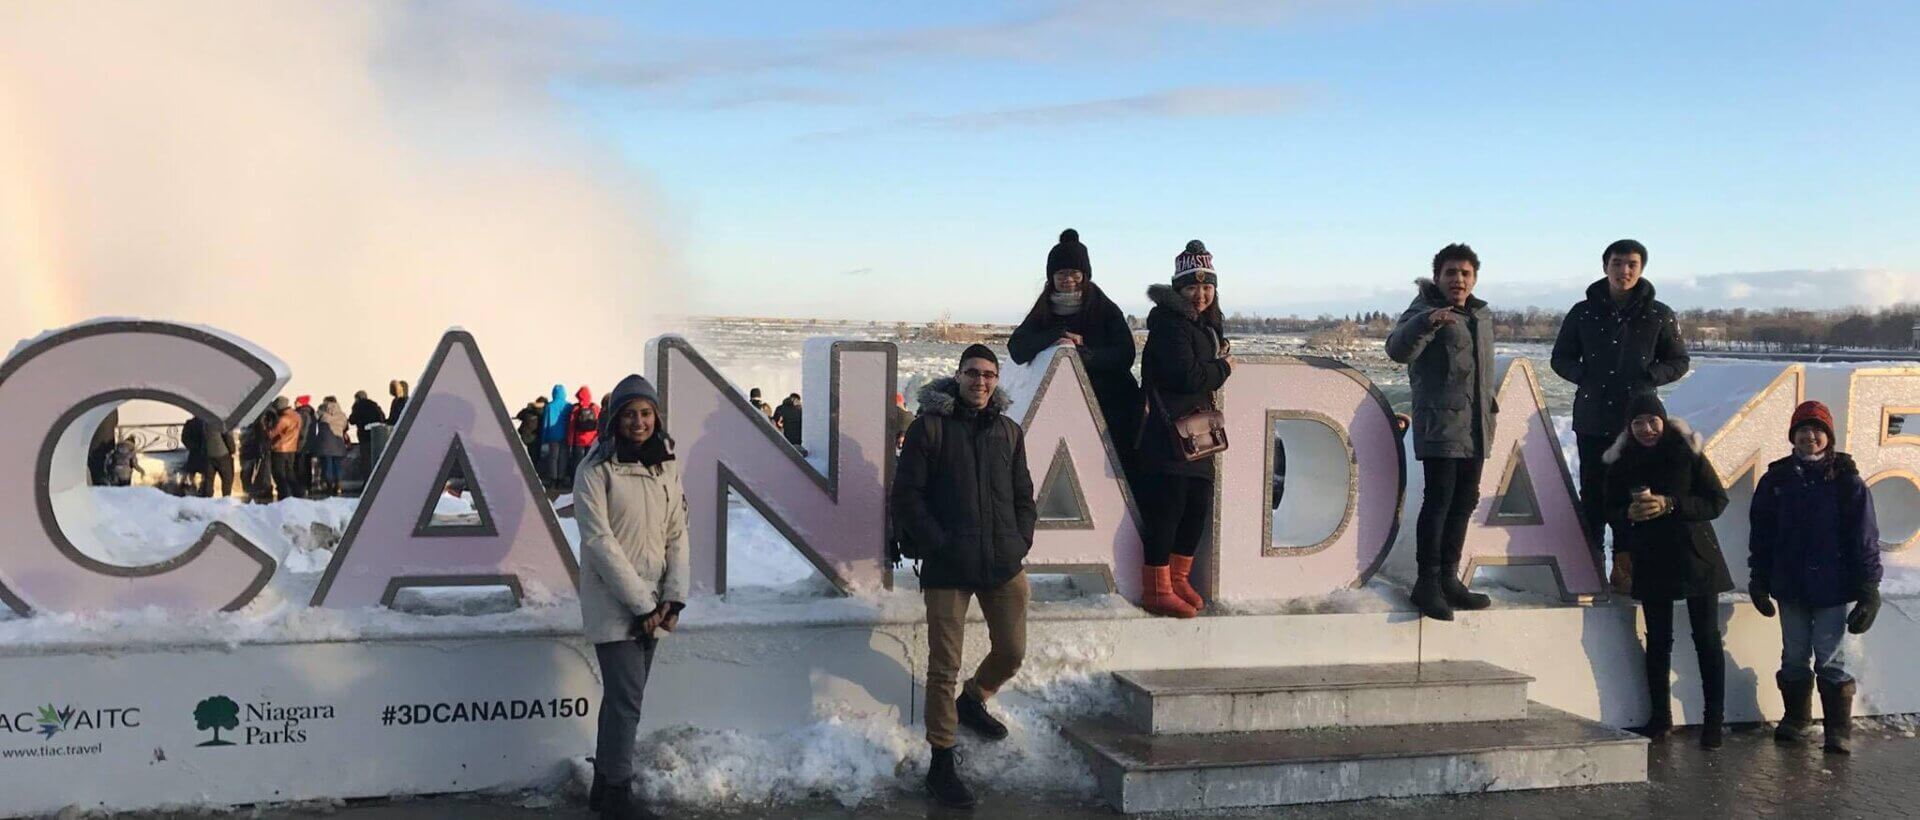 Group of students standing by Canada sign in Niagara Falls.